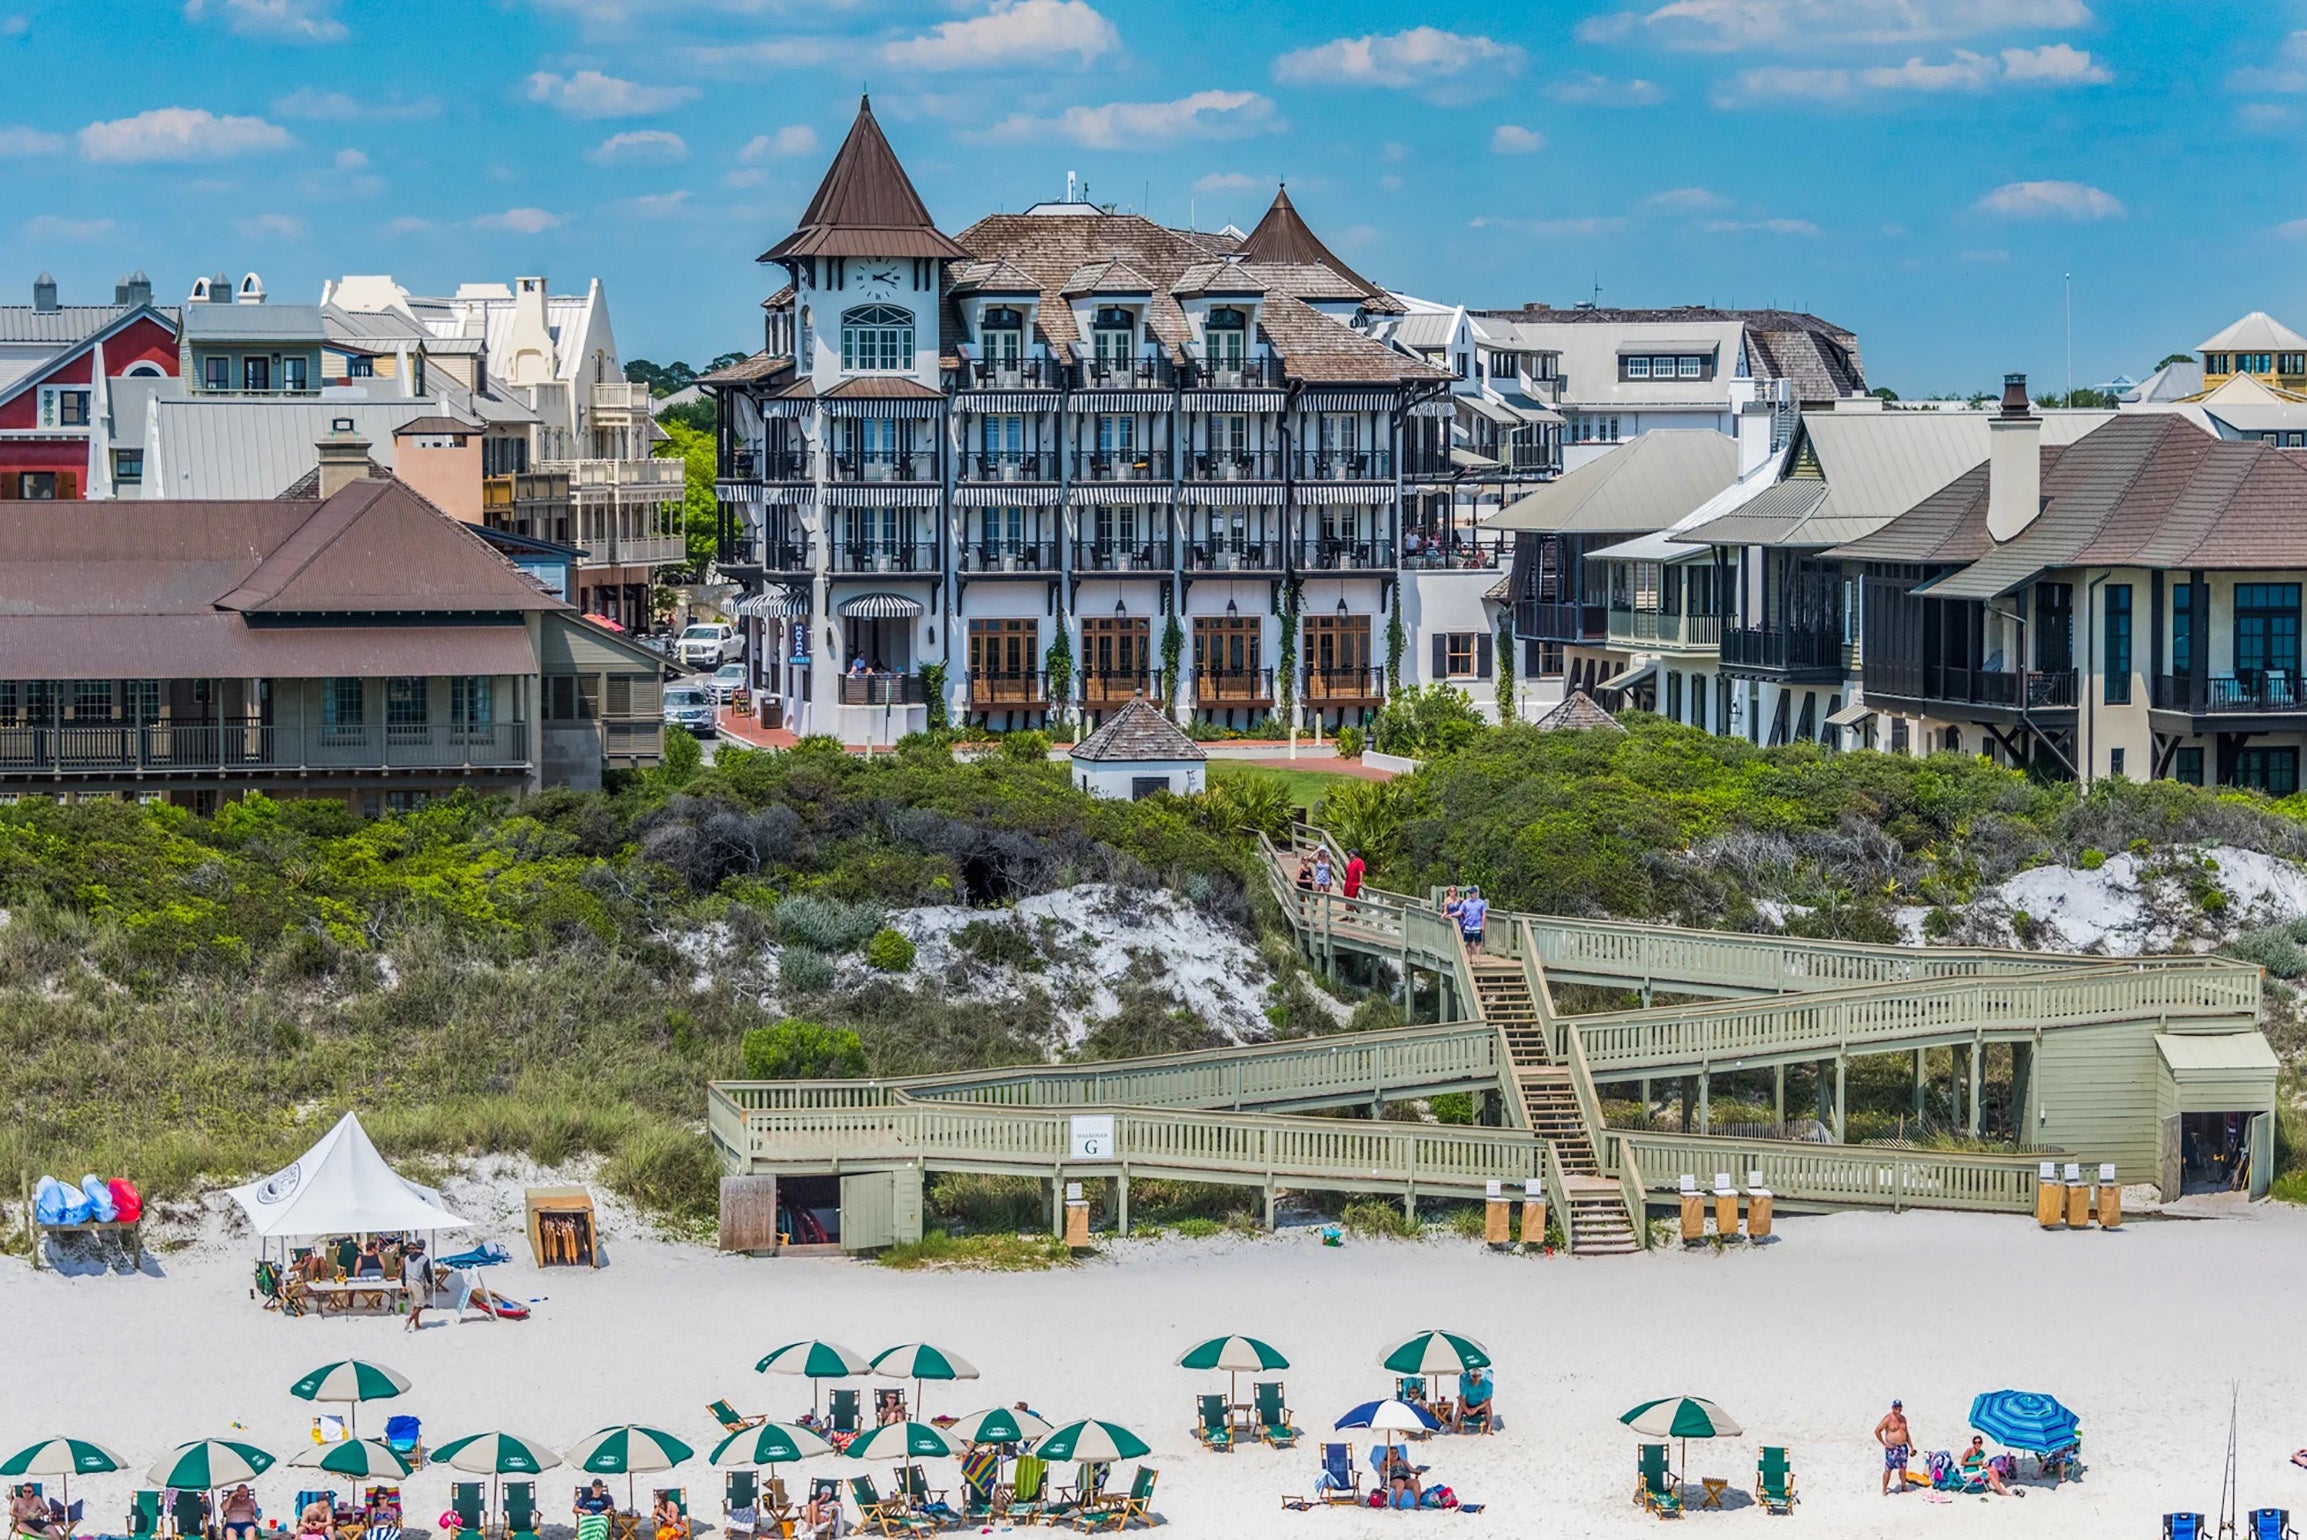 Check+out+the+Village+at+Rosemary+Beach+